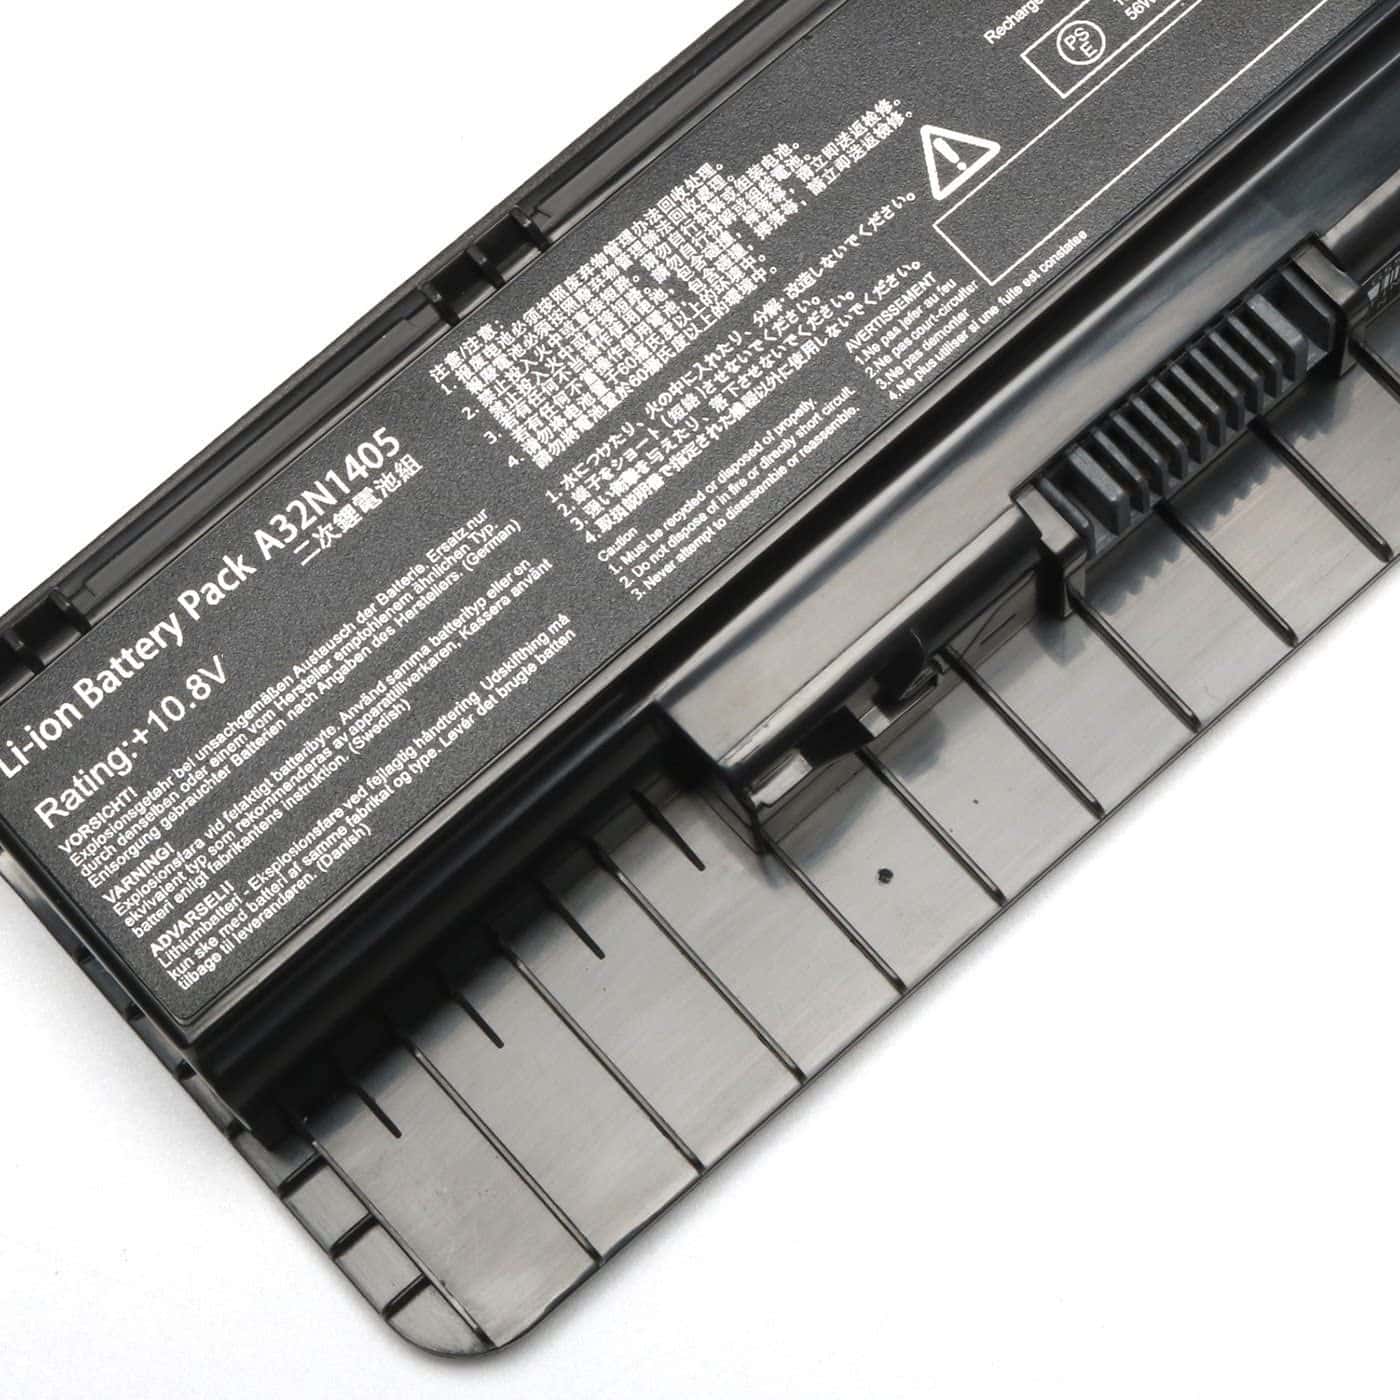 Techie Compatible Battery for Asus G551J - G551, G58JK, N771, A32N1405 Laptops (4000mAh, 6-Cell)